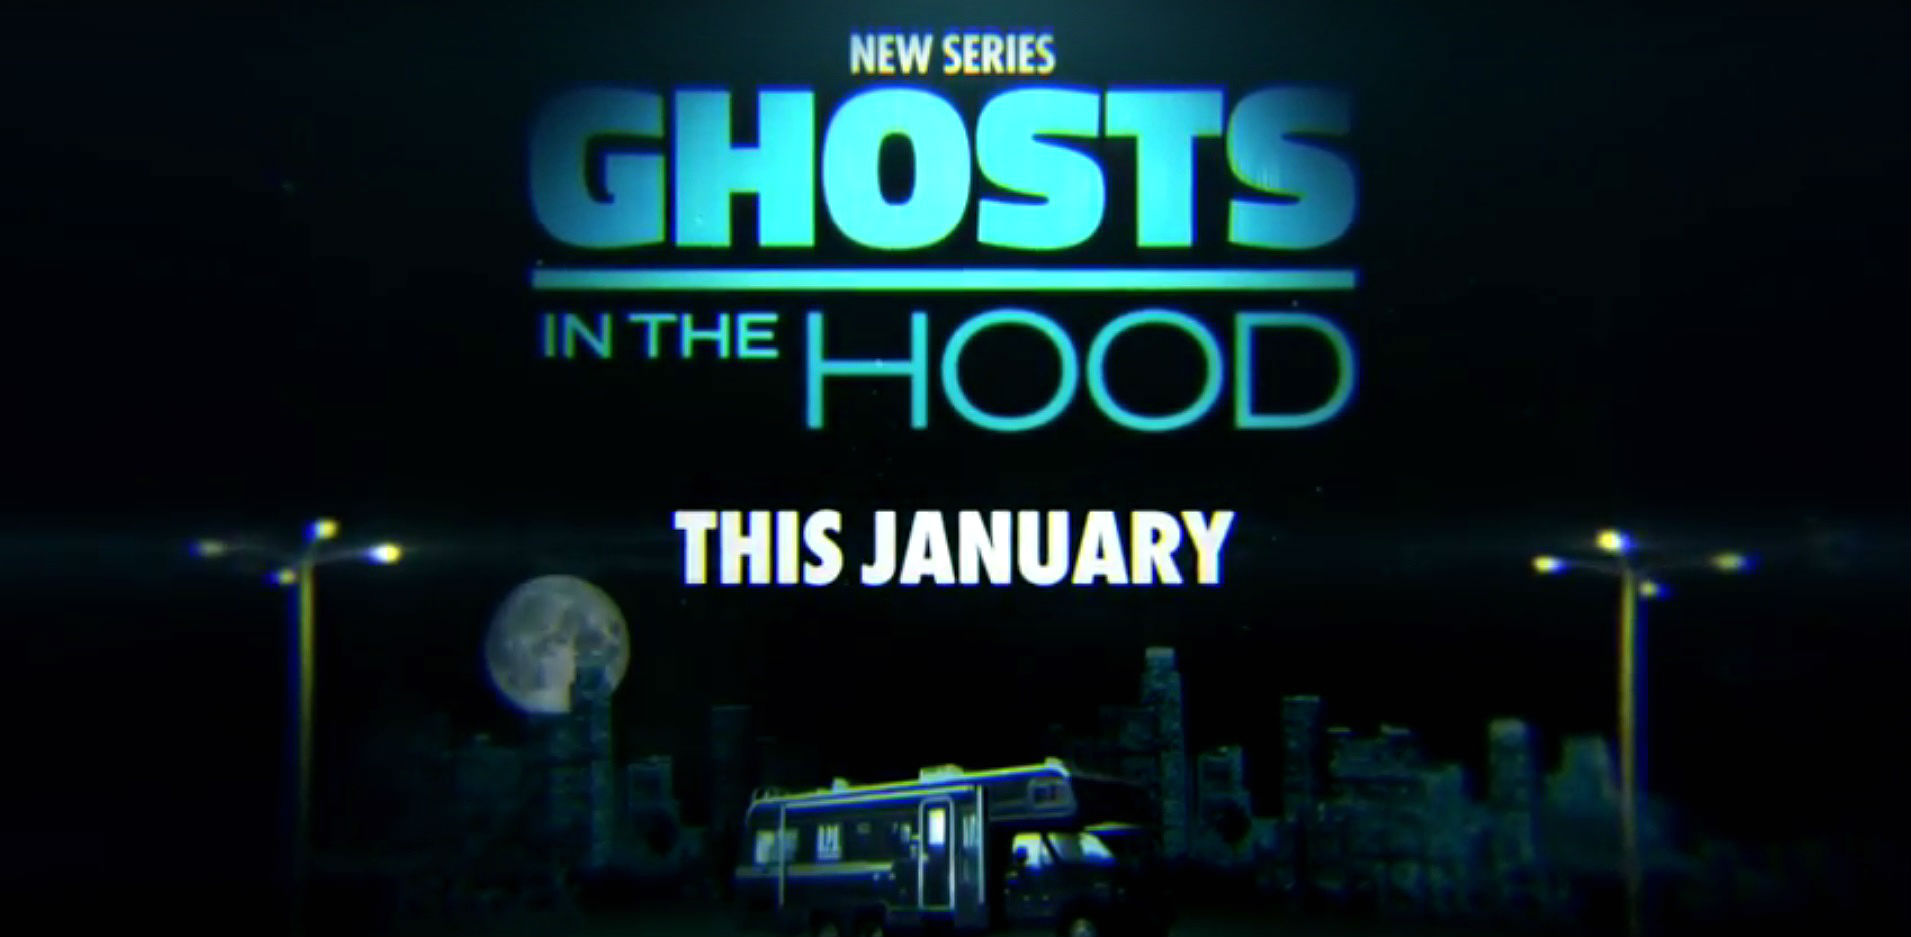 Ghosts In the Hood: New Paranormal Series Coming to WE tv - canceled TV